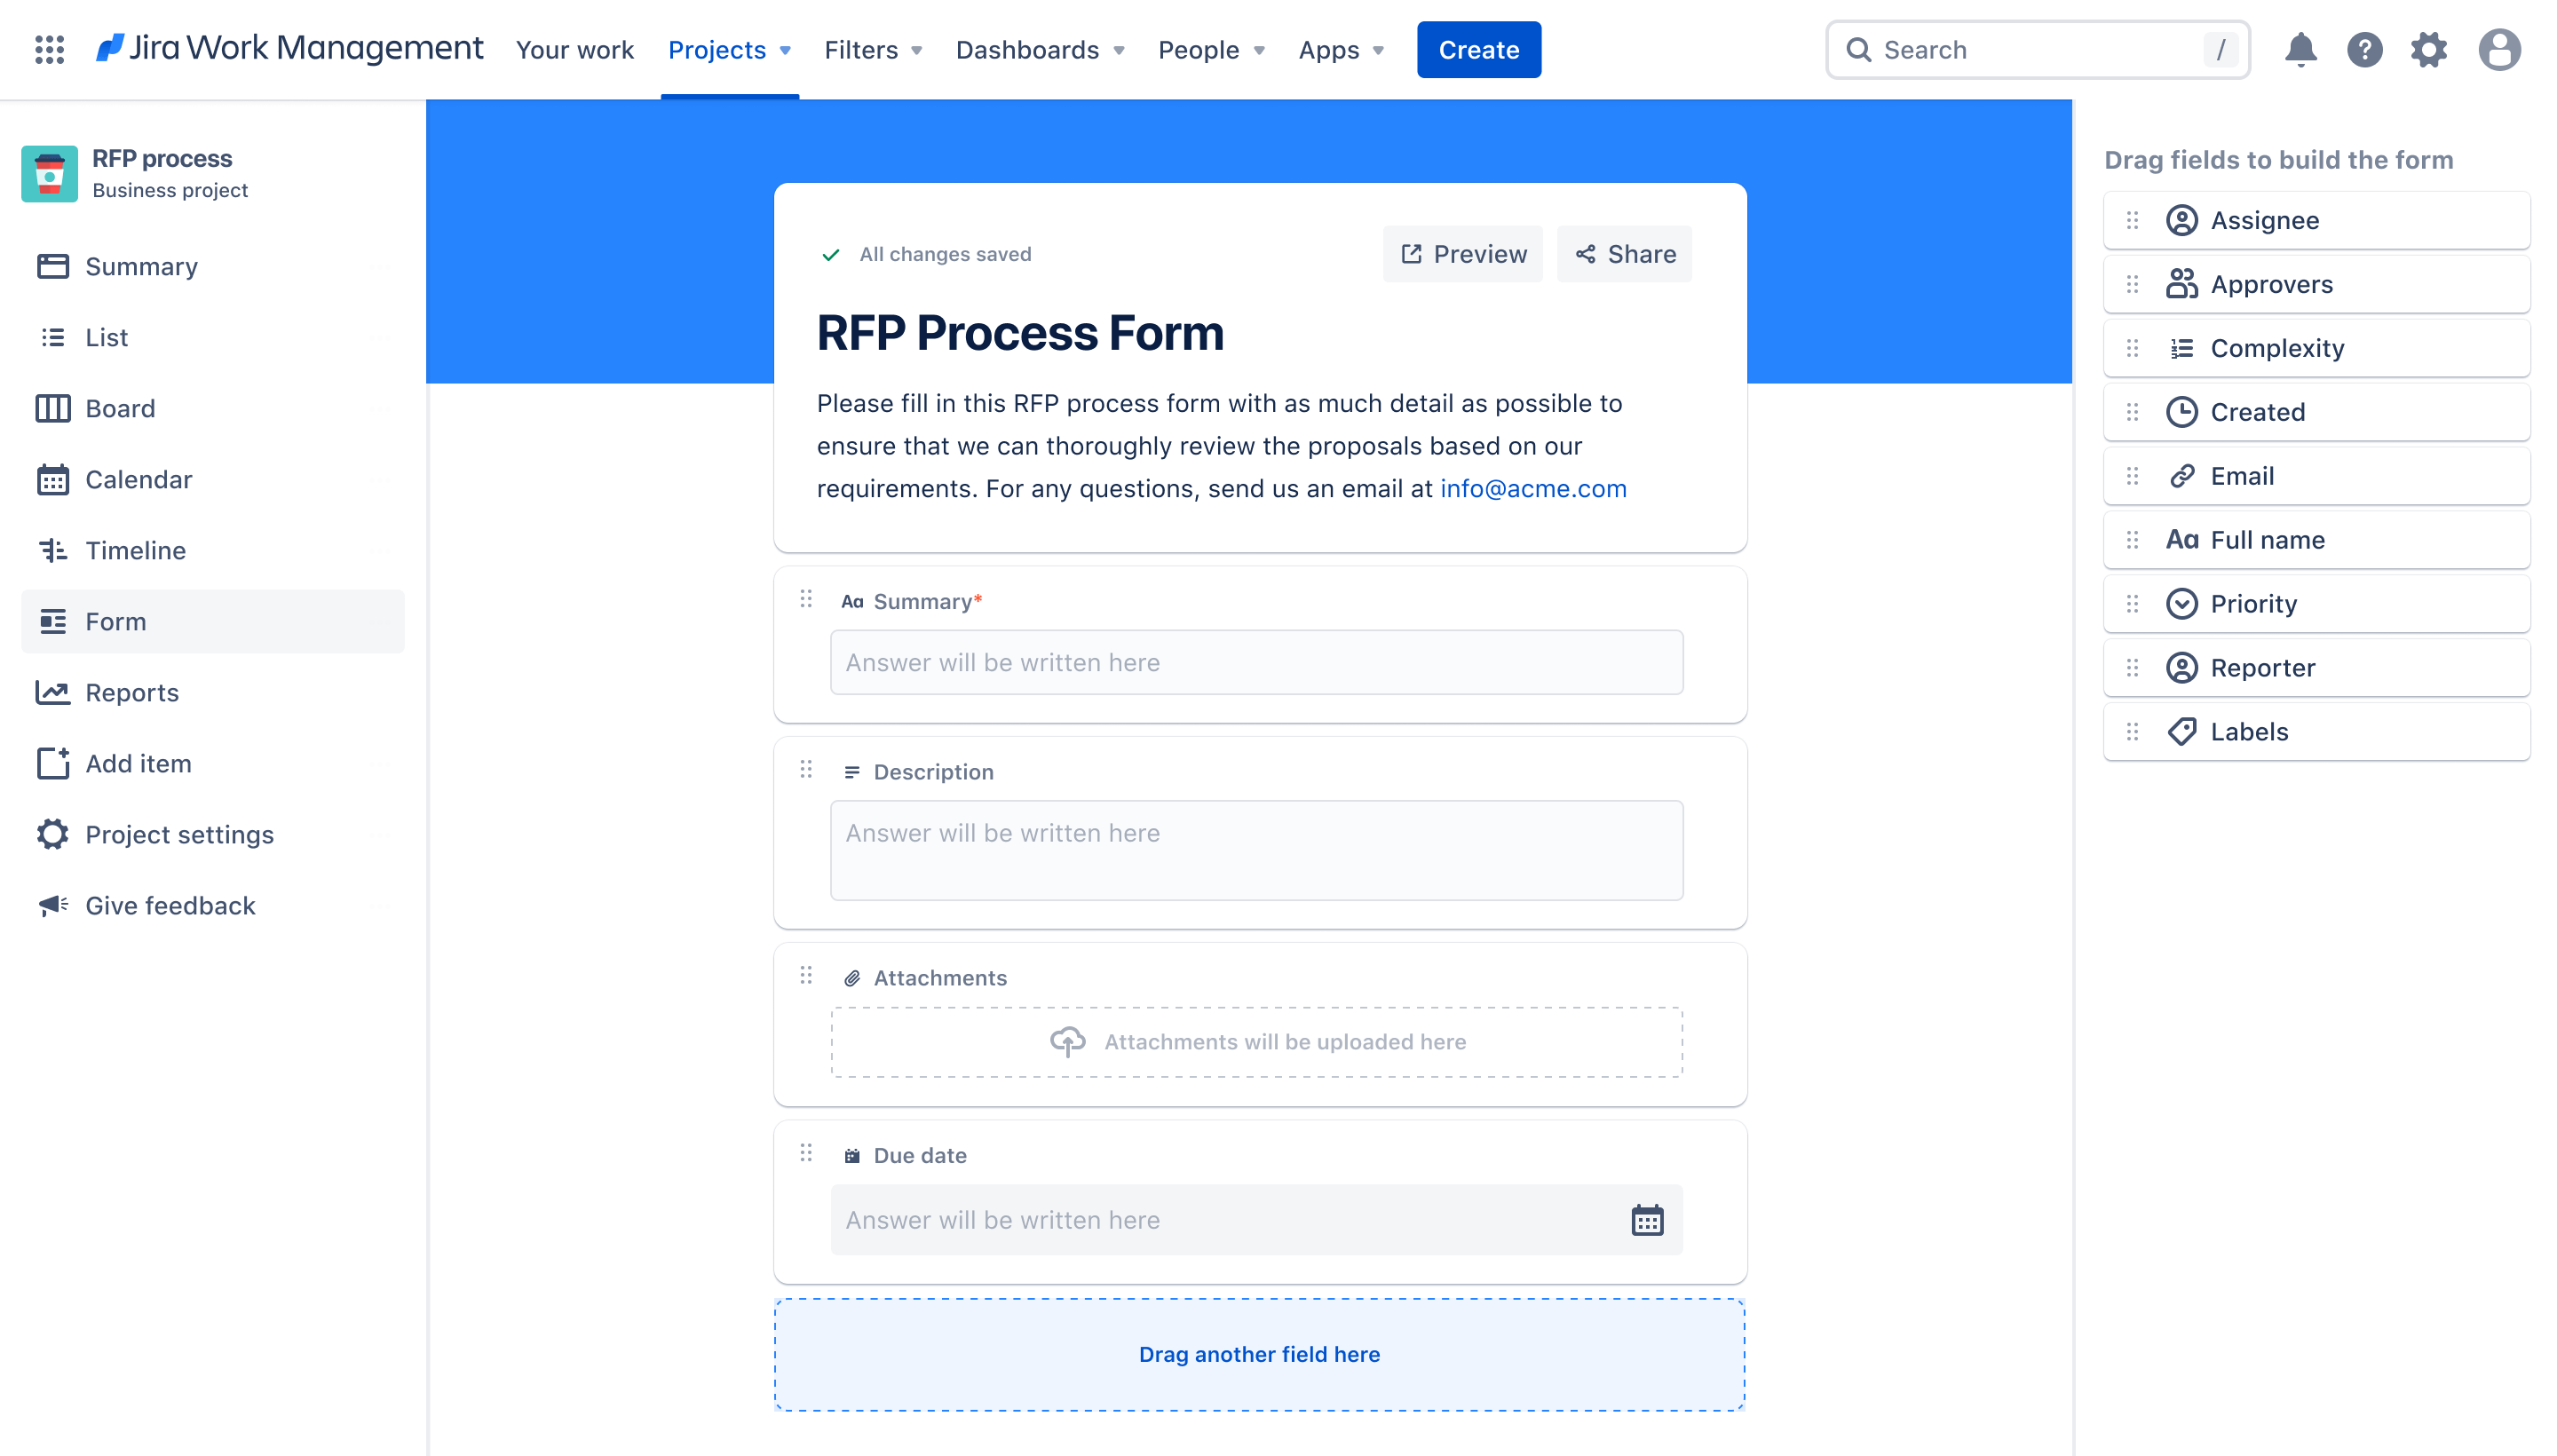 RFP process form from Jira Work Management